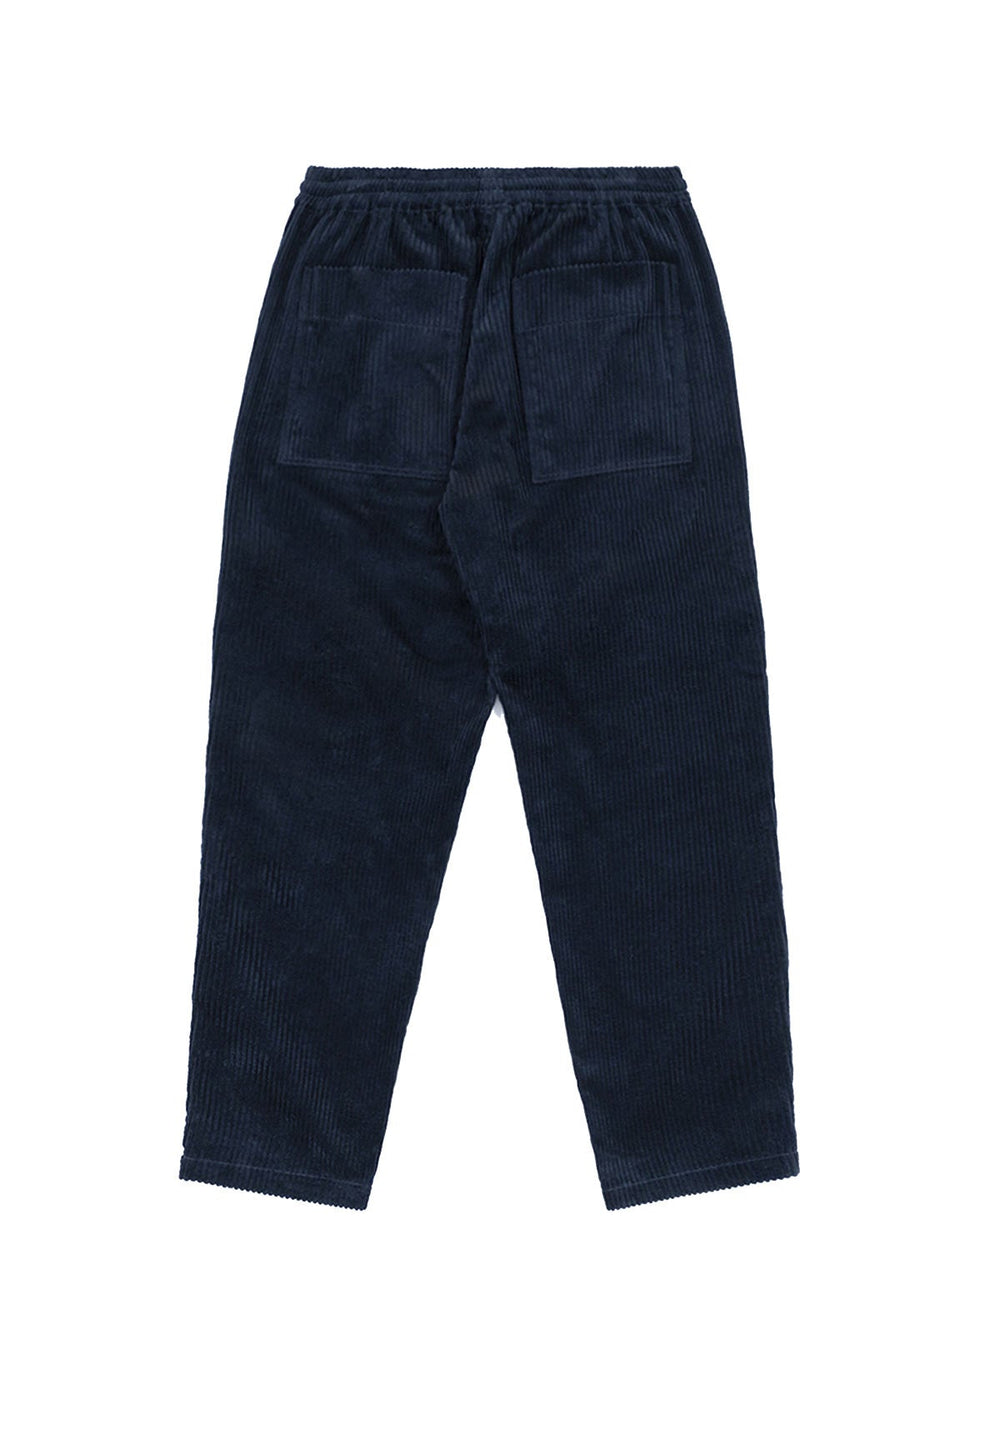 Product photo of the back of wide corduroy pants in deep navy.